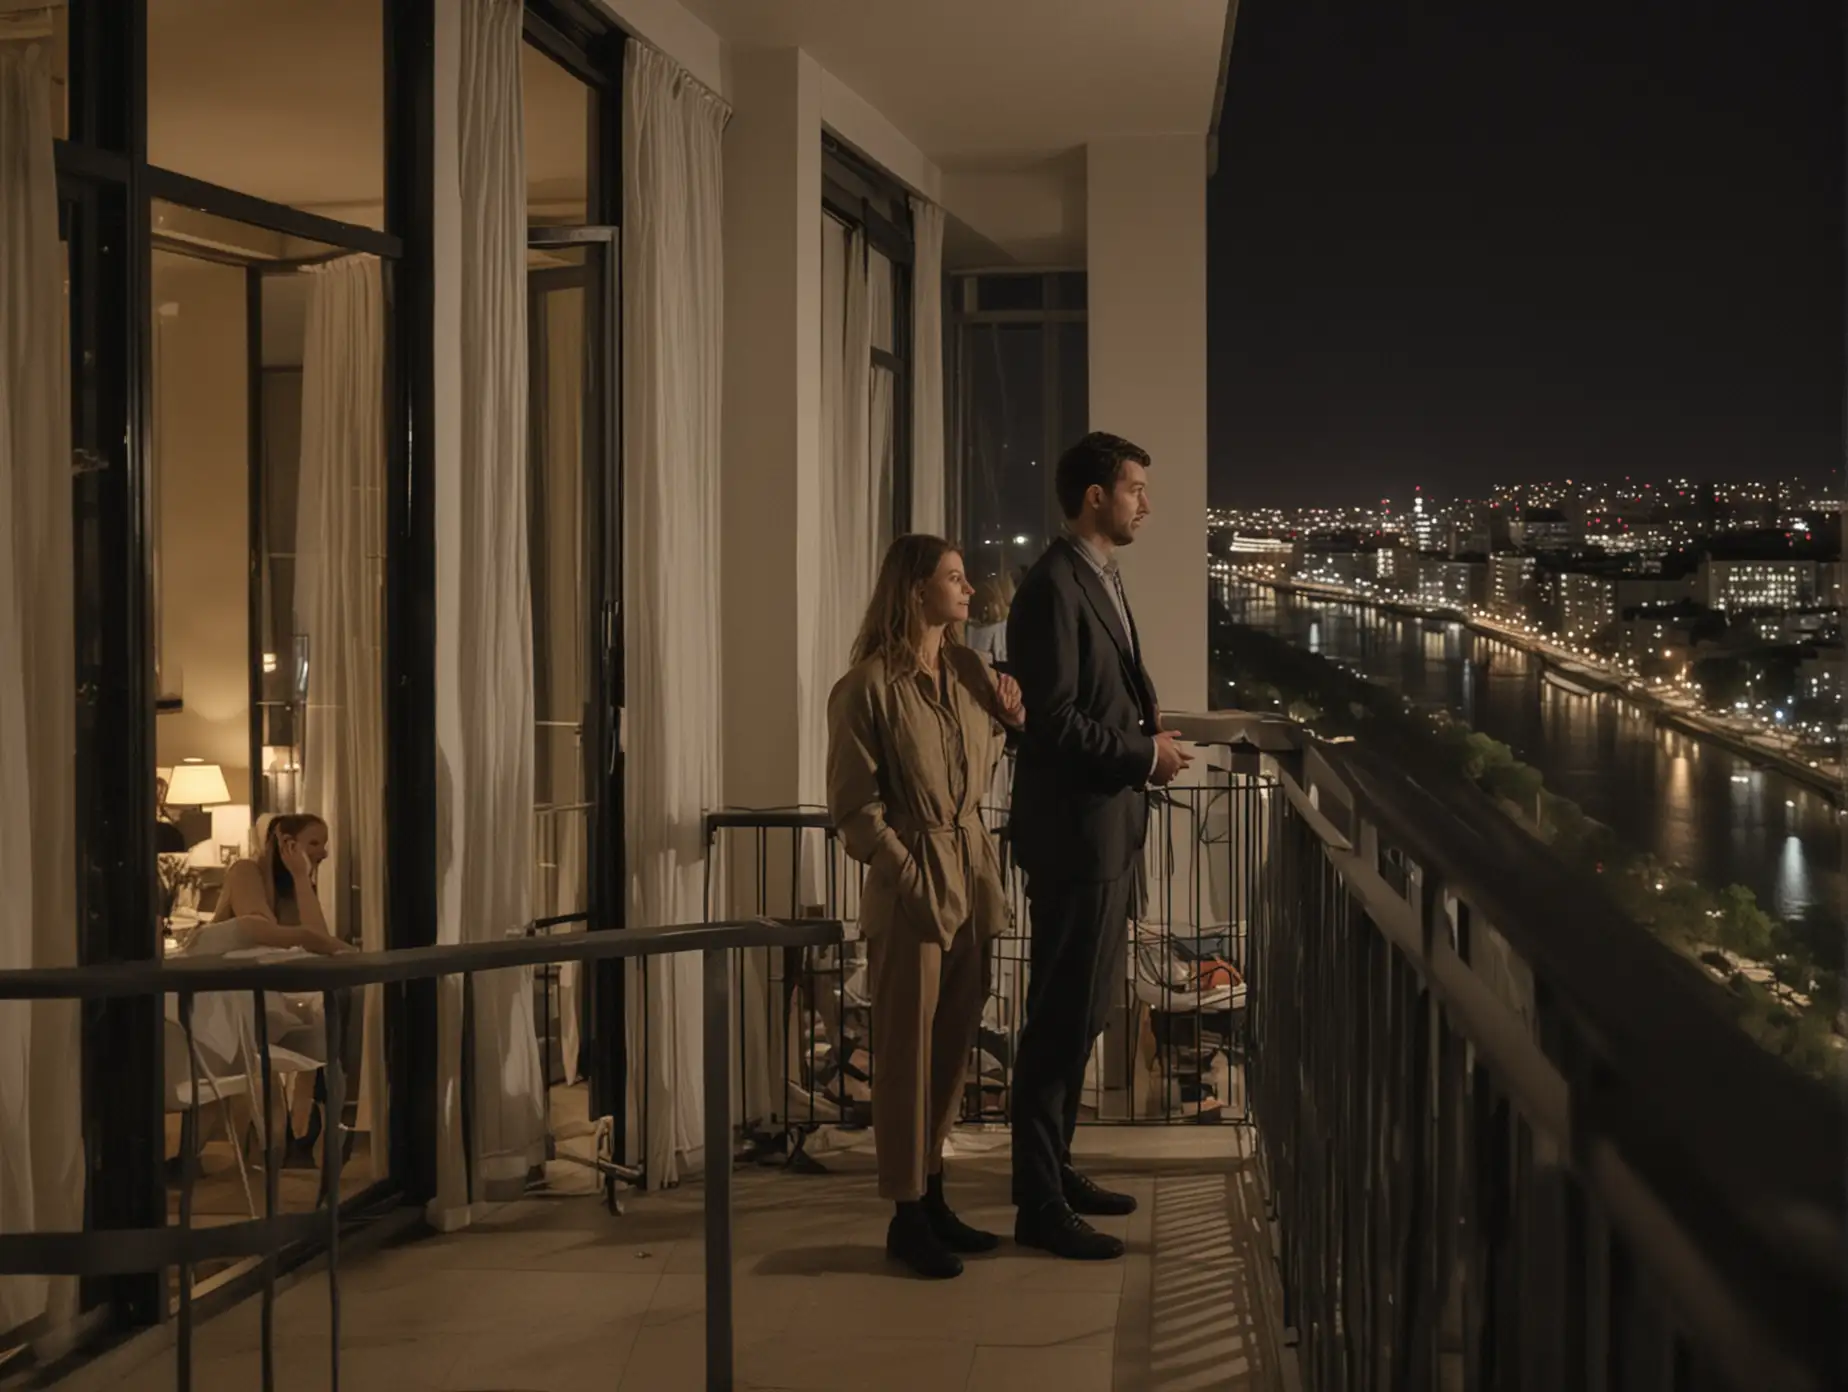 Couple-Admiring-Night-River-View-from-8th-Floor-Balcony